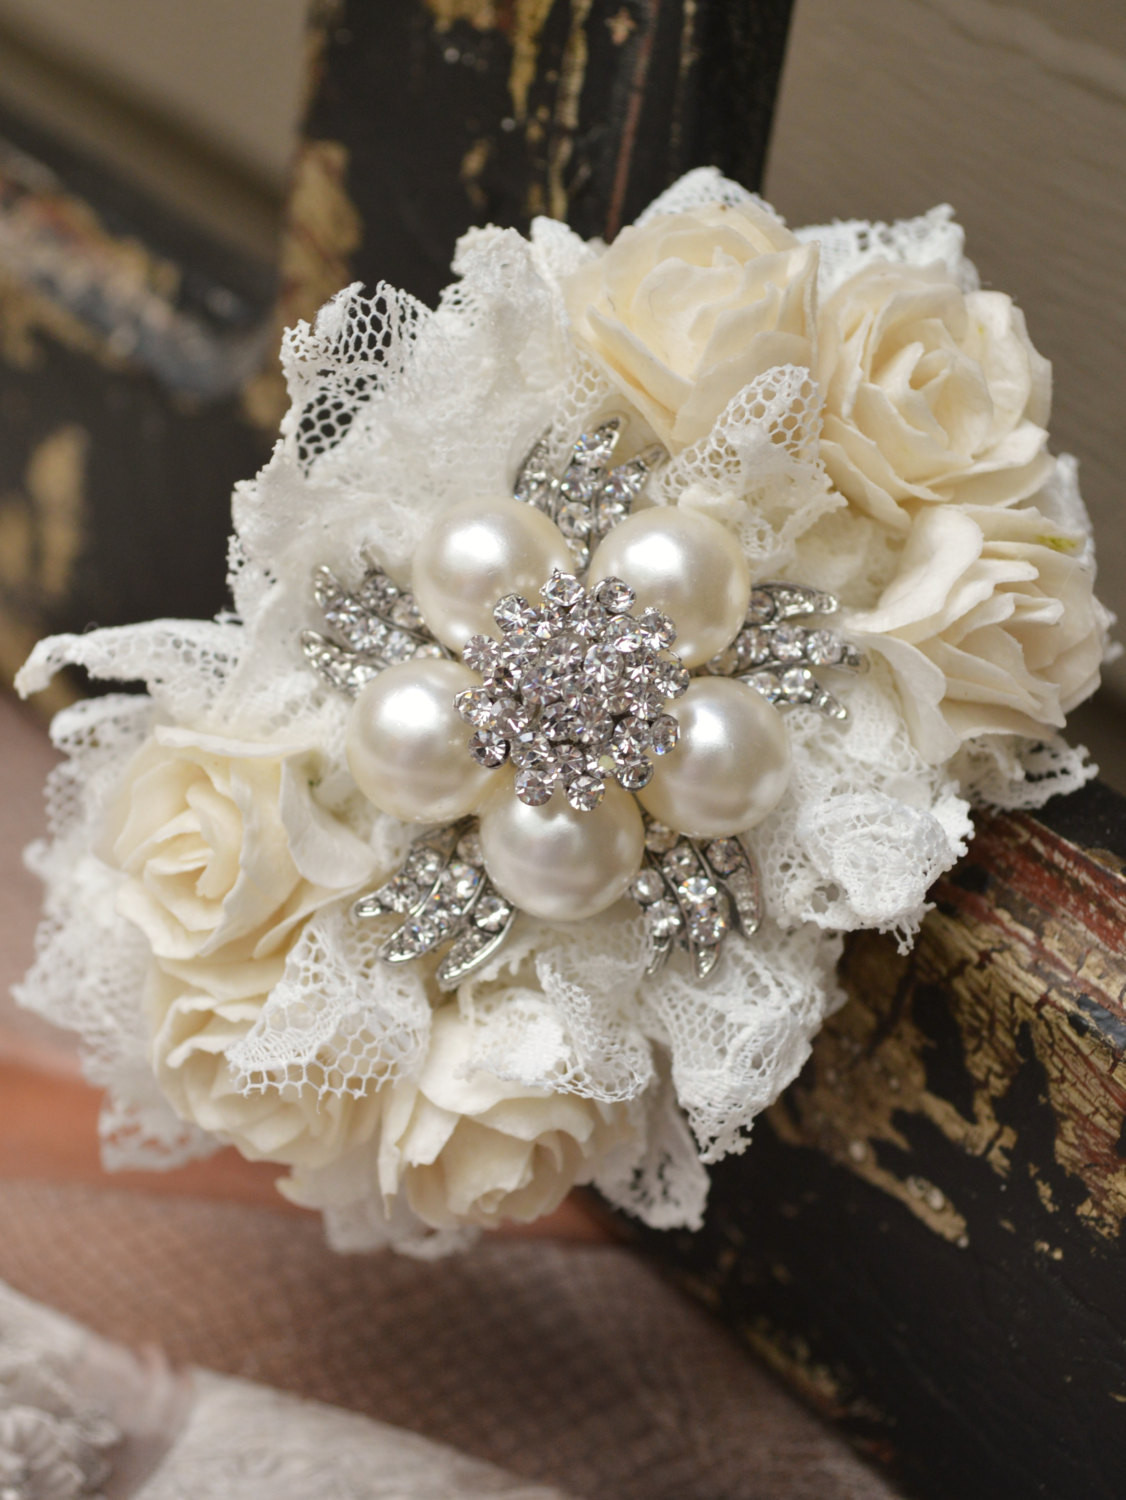 Brooches Corsage
 Brooch Wrist Corsage Ivory and White